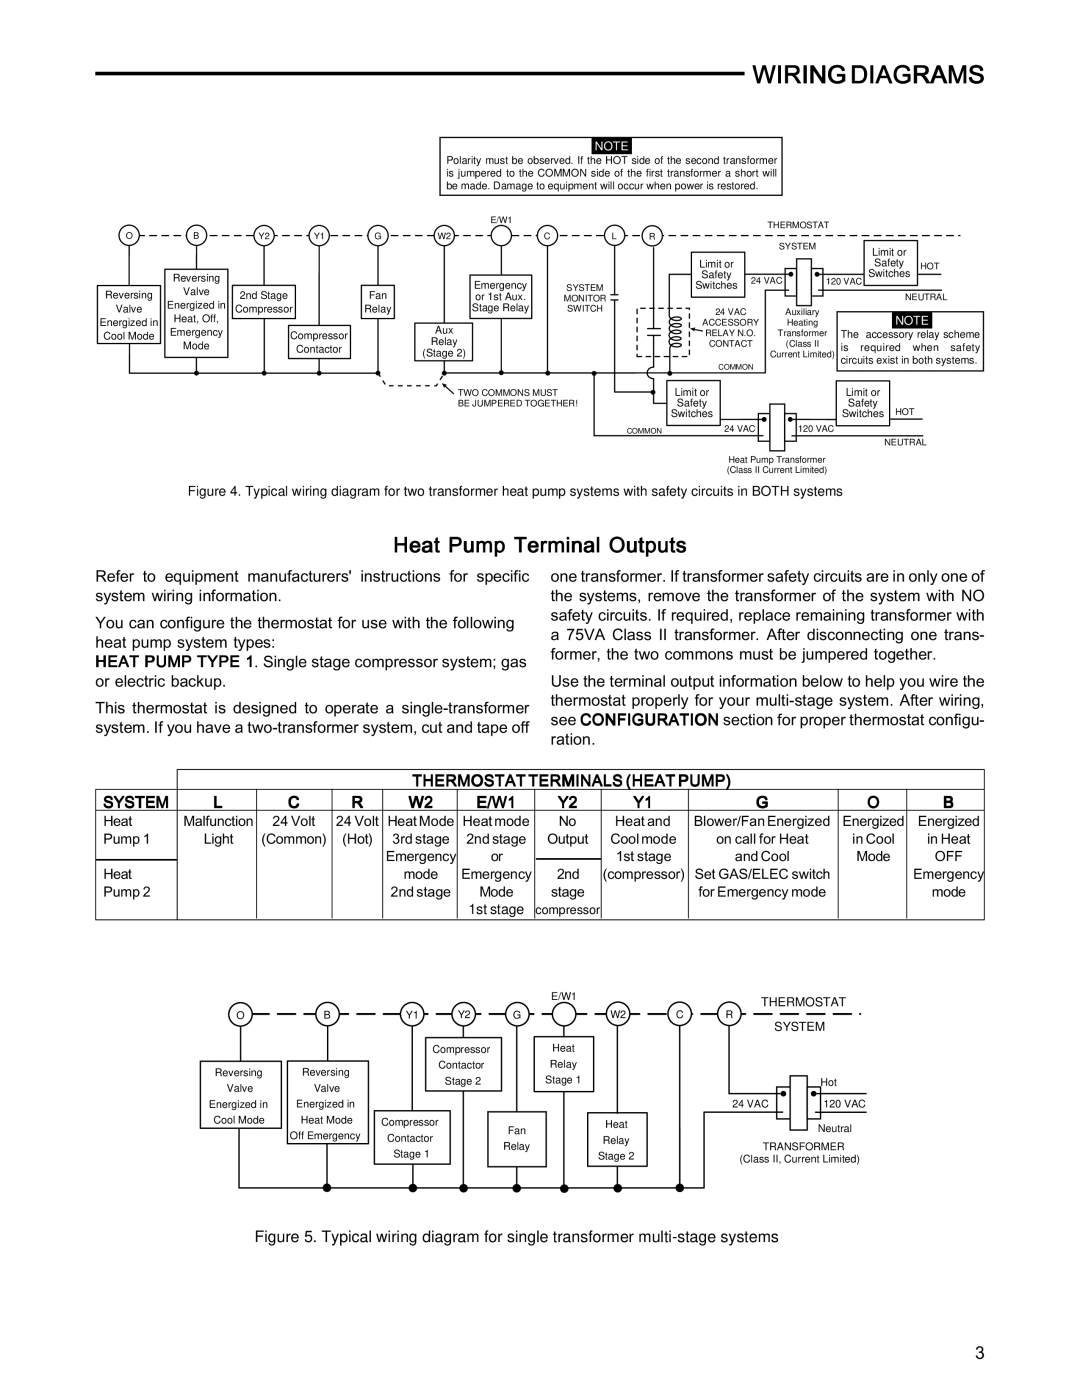 White Rodgers 1F83-277, PART NO. 37-6509A installation instructions Wiring Diagrams, Heat Pump Terminal Outputs 